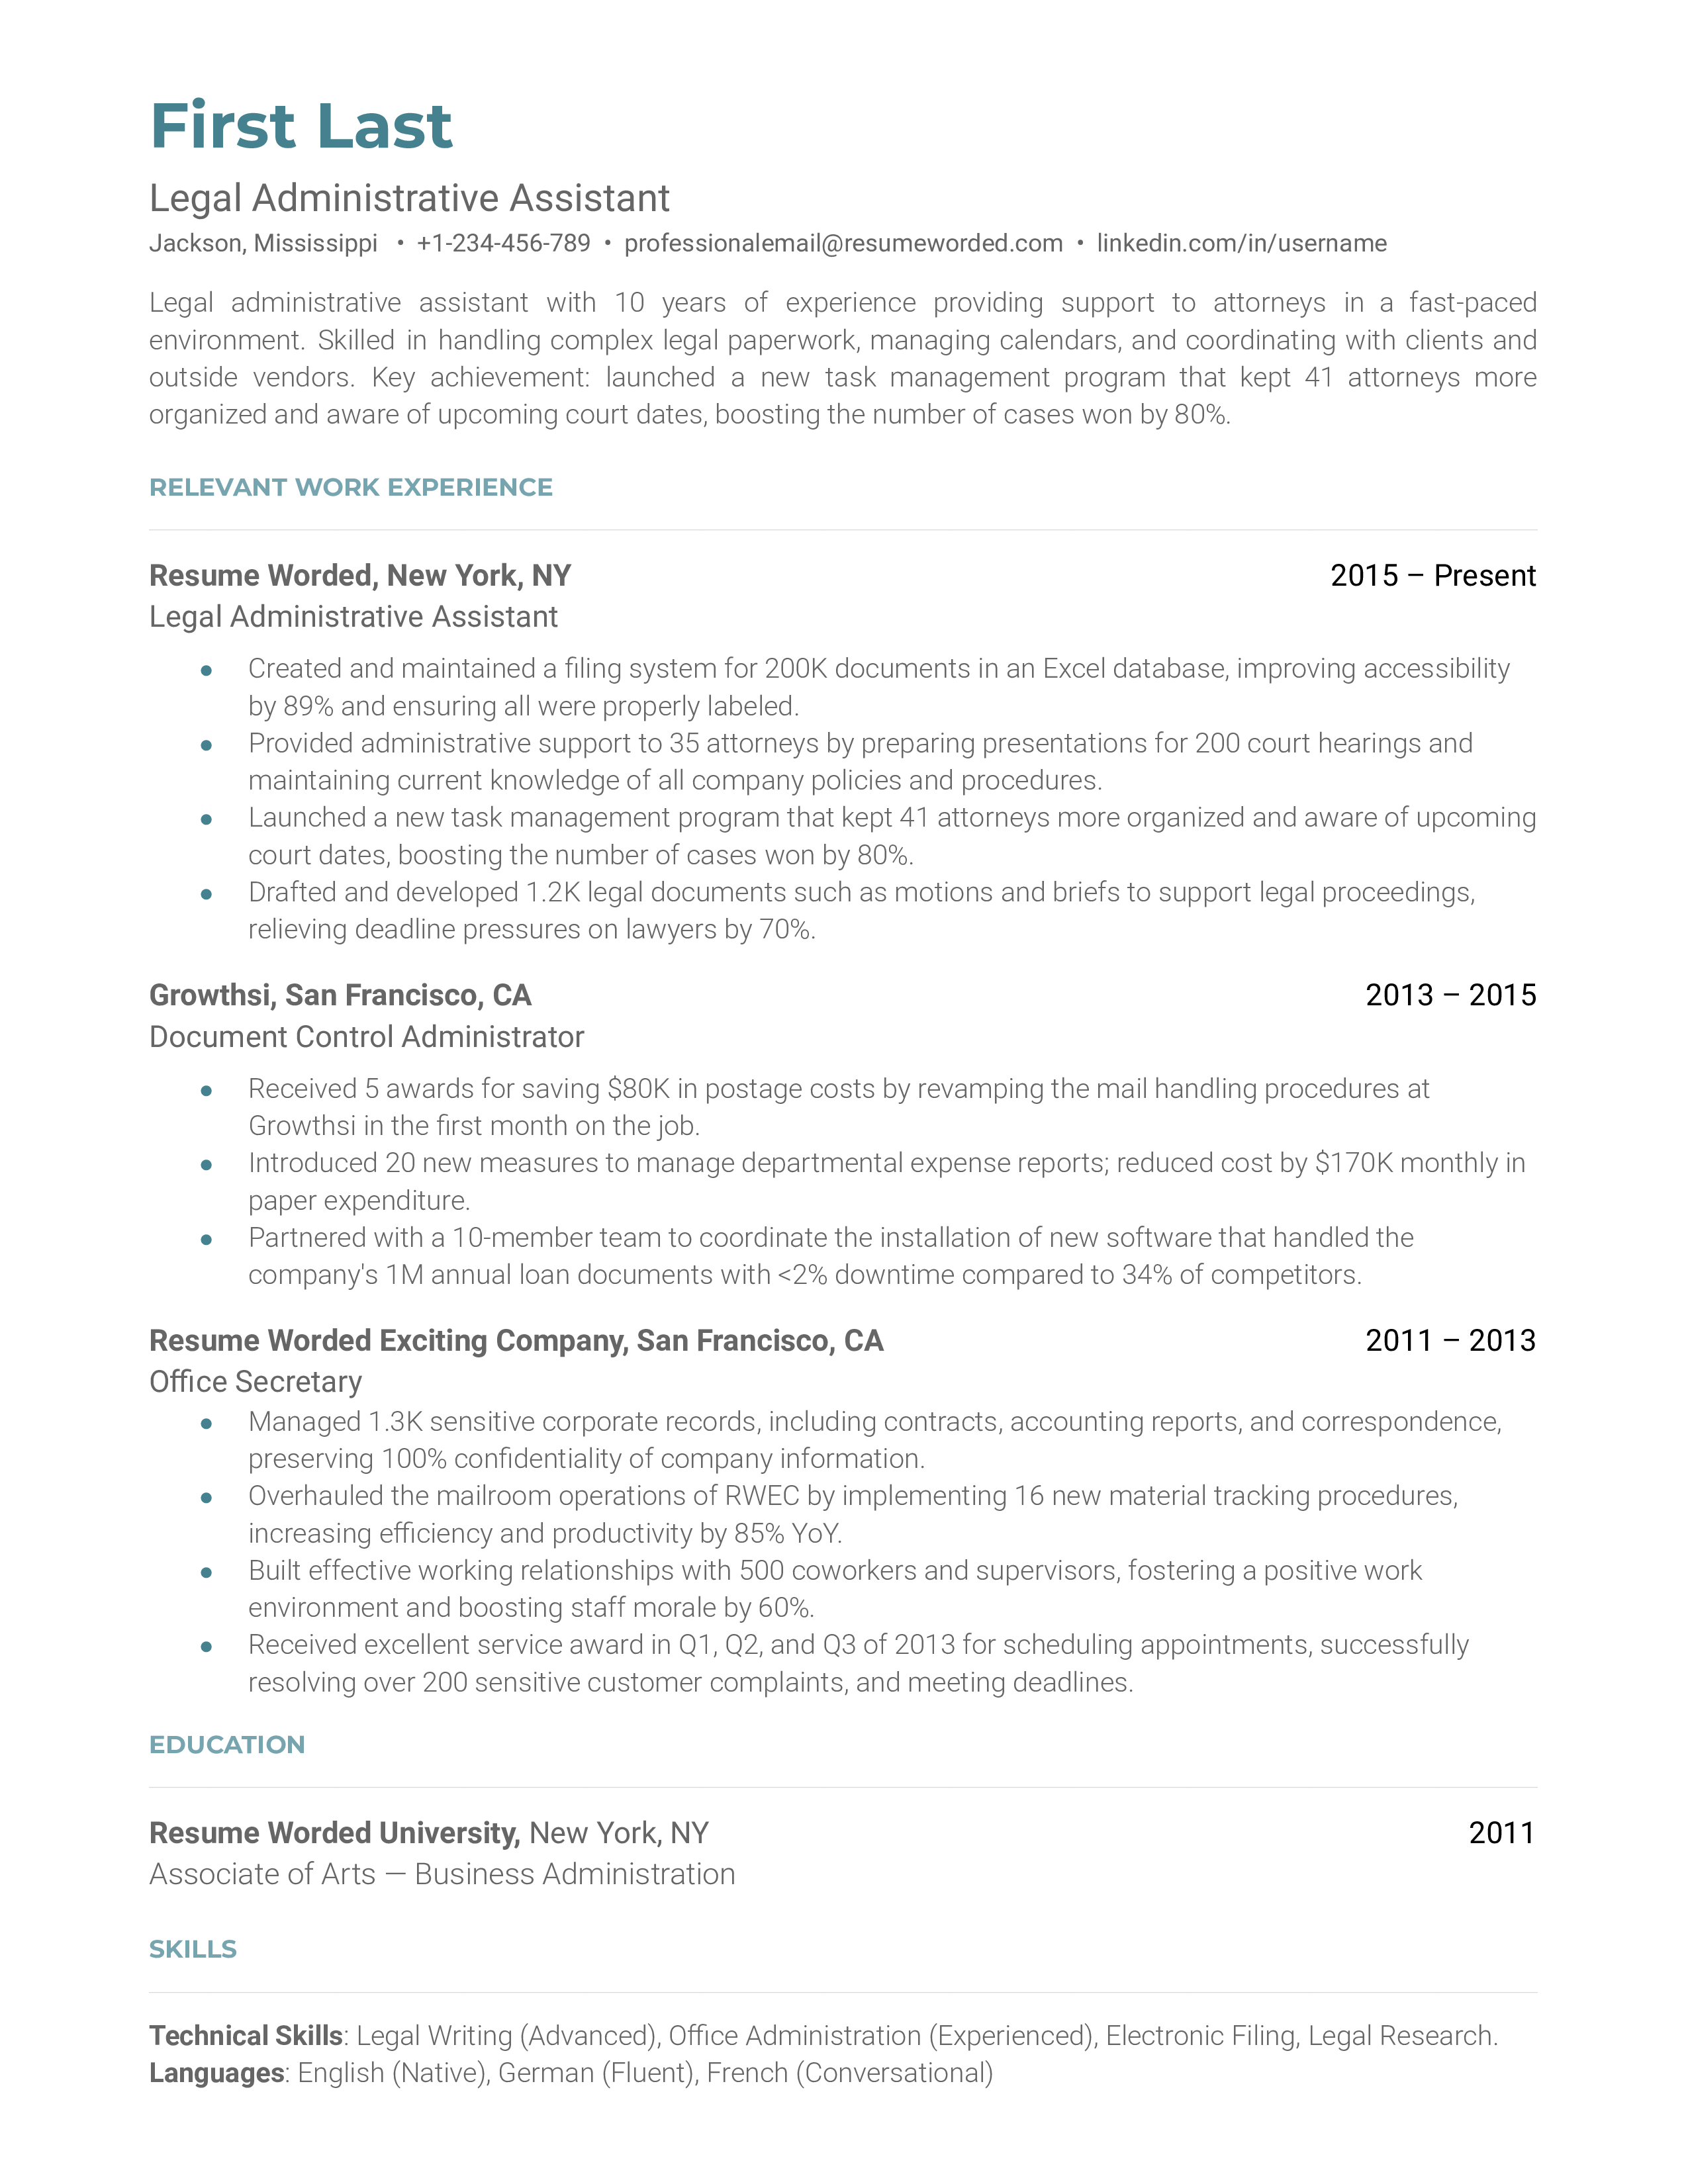 An example CV for a Legal Administrative Assistant role.